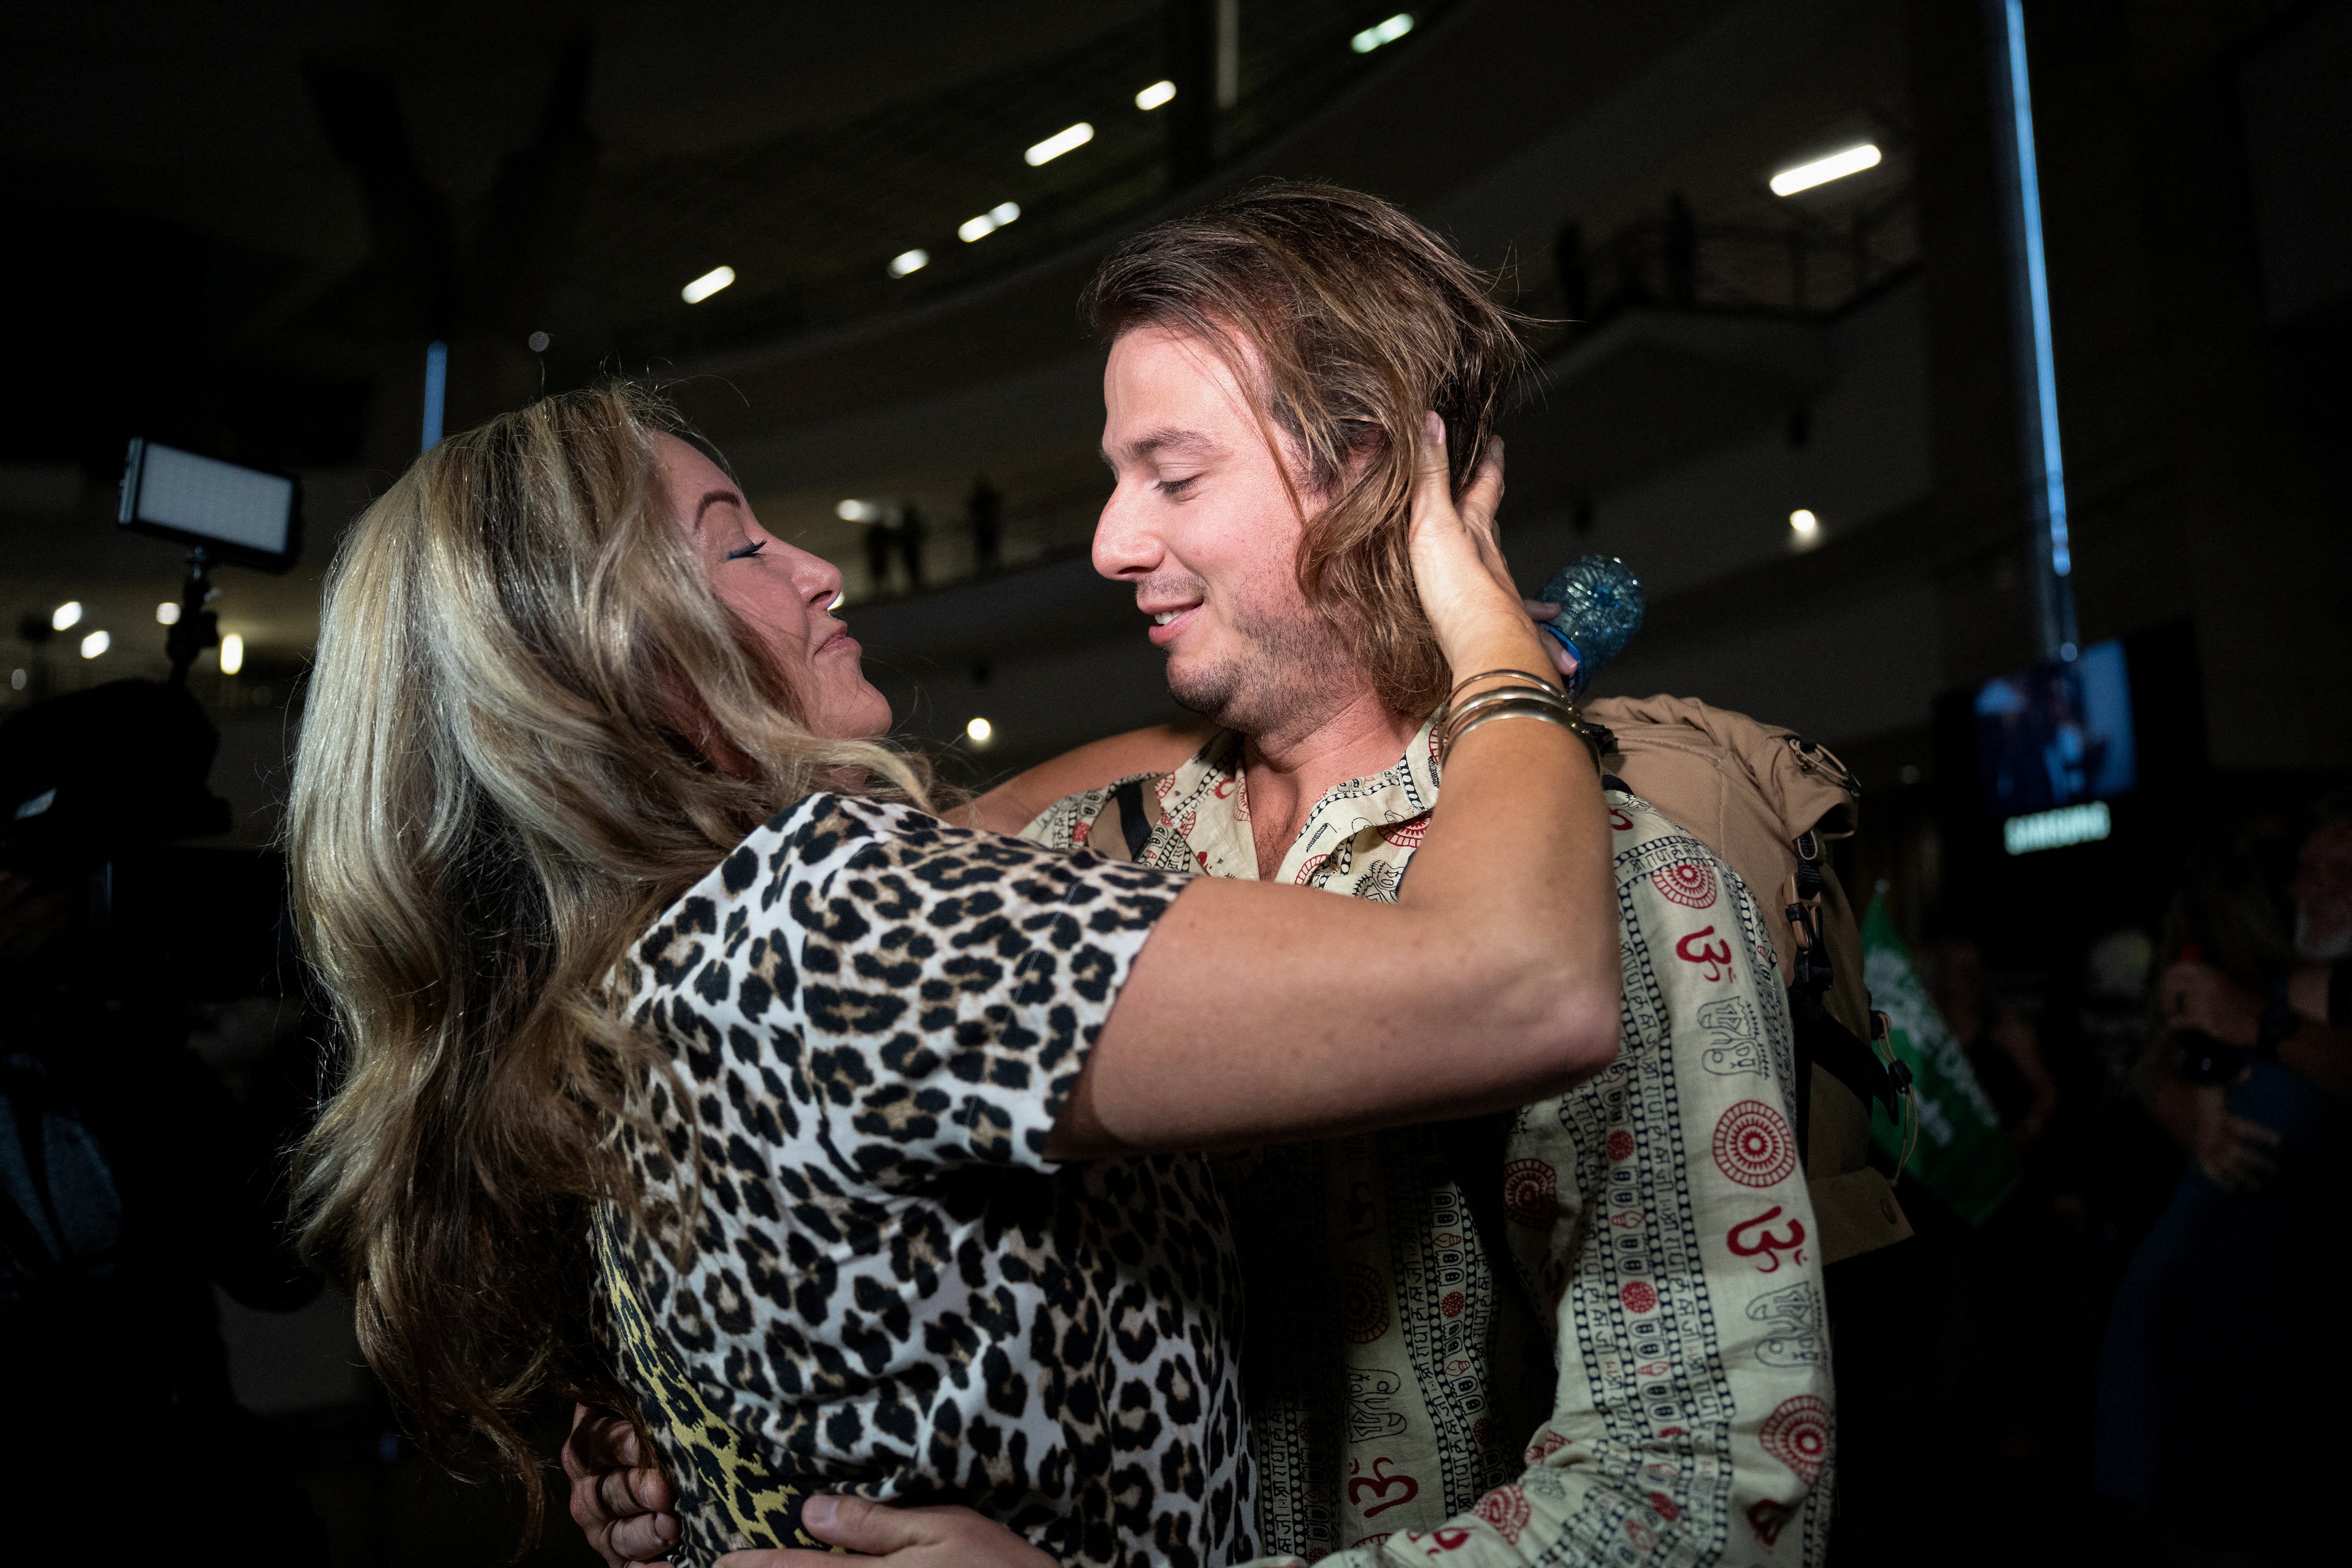 A family member greets Jonathan Hainsworth on his arrival at O.R. Tambo International Airport after he was evacuated from Sudan to escape the conflict